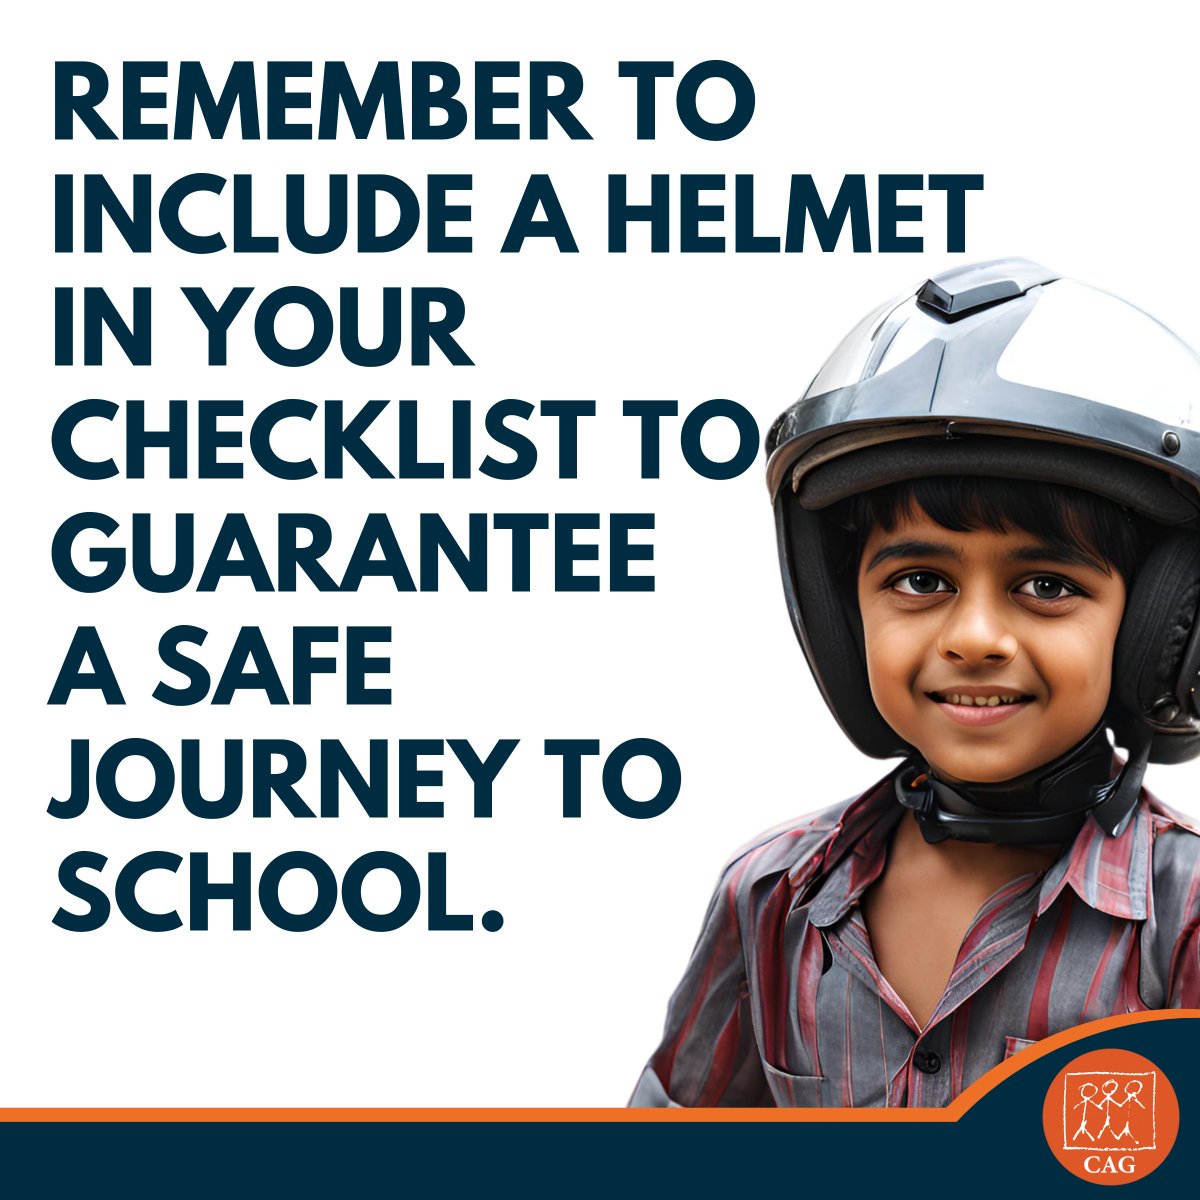 Will your child be travelling to school on a bike or scooter? She must have a helmet. Even if her school is only a 10-minute ride away. Prioritising your child's safety is the best start to the new school year. School uniforms ✅ Books ✅ Helmet ✅ @chennaicorp @chennaipolice_